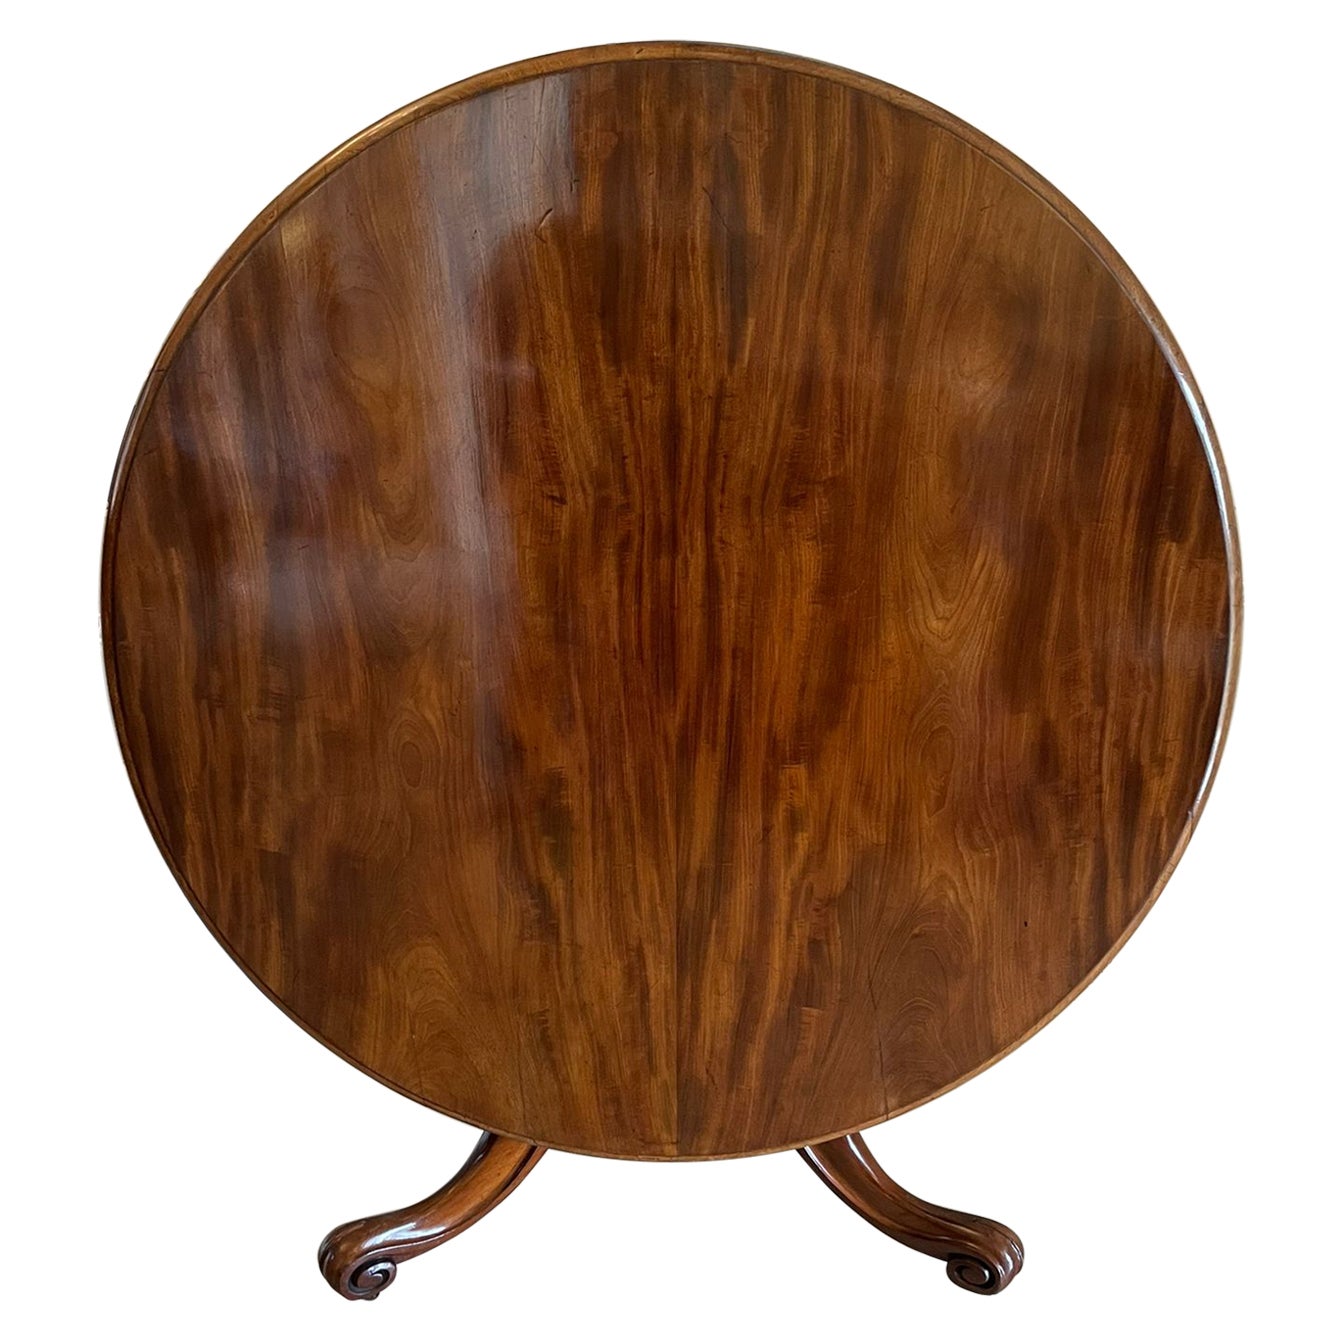 Outstanding Quality Antique Figured Mahogany 6 Seater Circular Dining Table For Sale